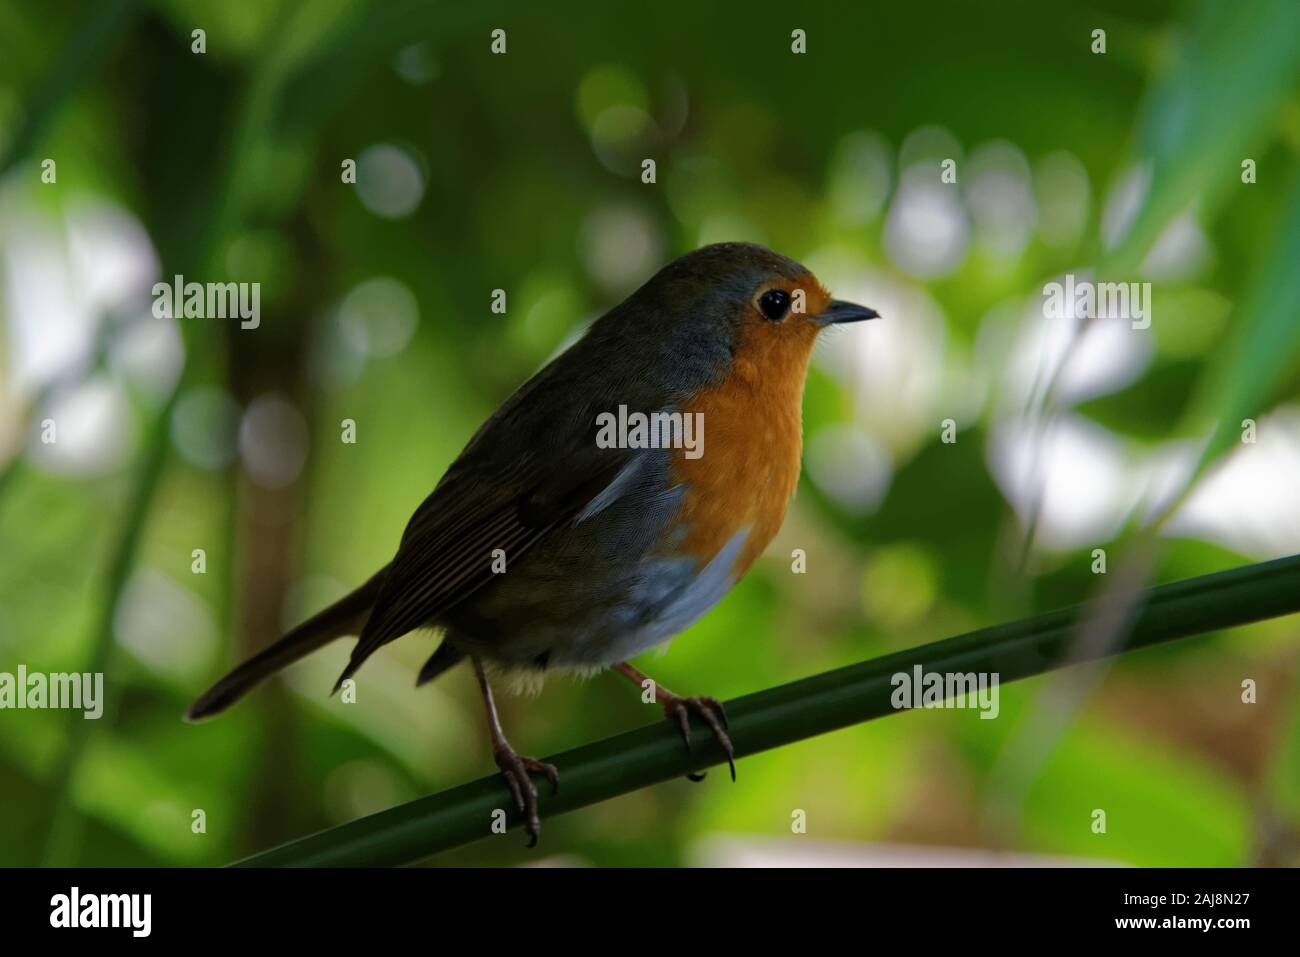 The European robin (Erithacus rubecula), known simply as the robin or robin redbreast in the British Isles, is a small insectivorous passerine bird. Stock Photo